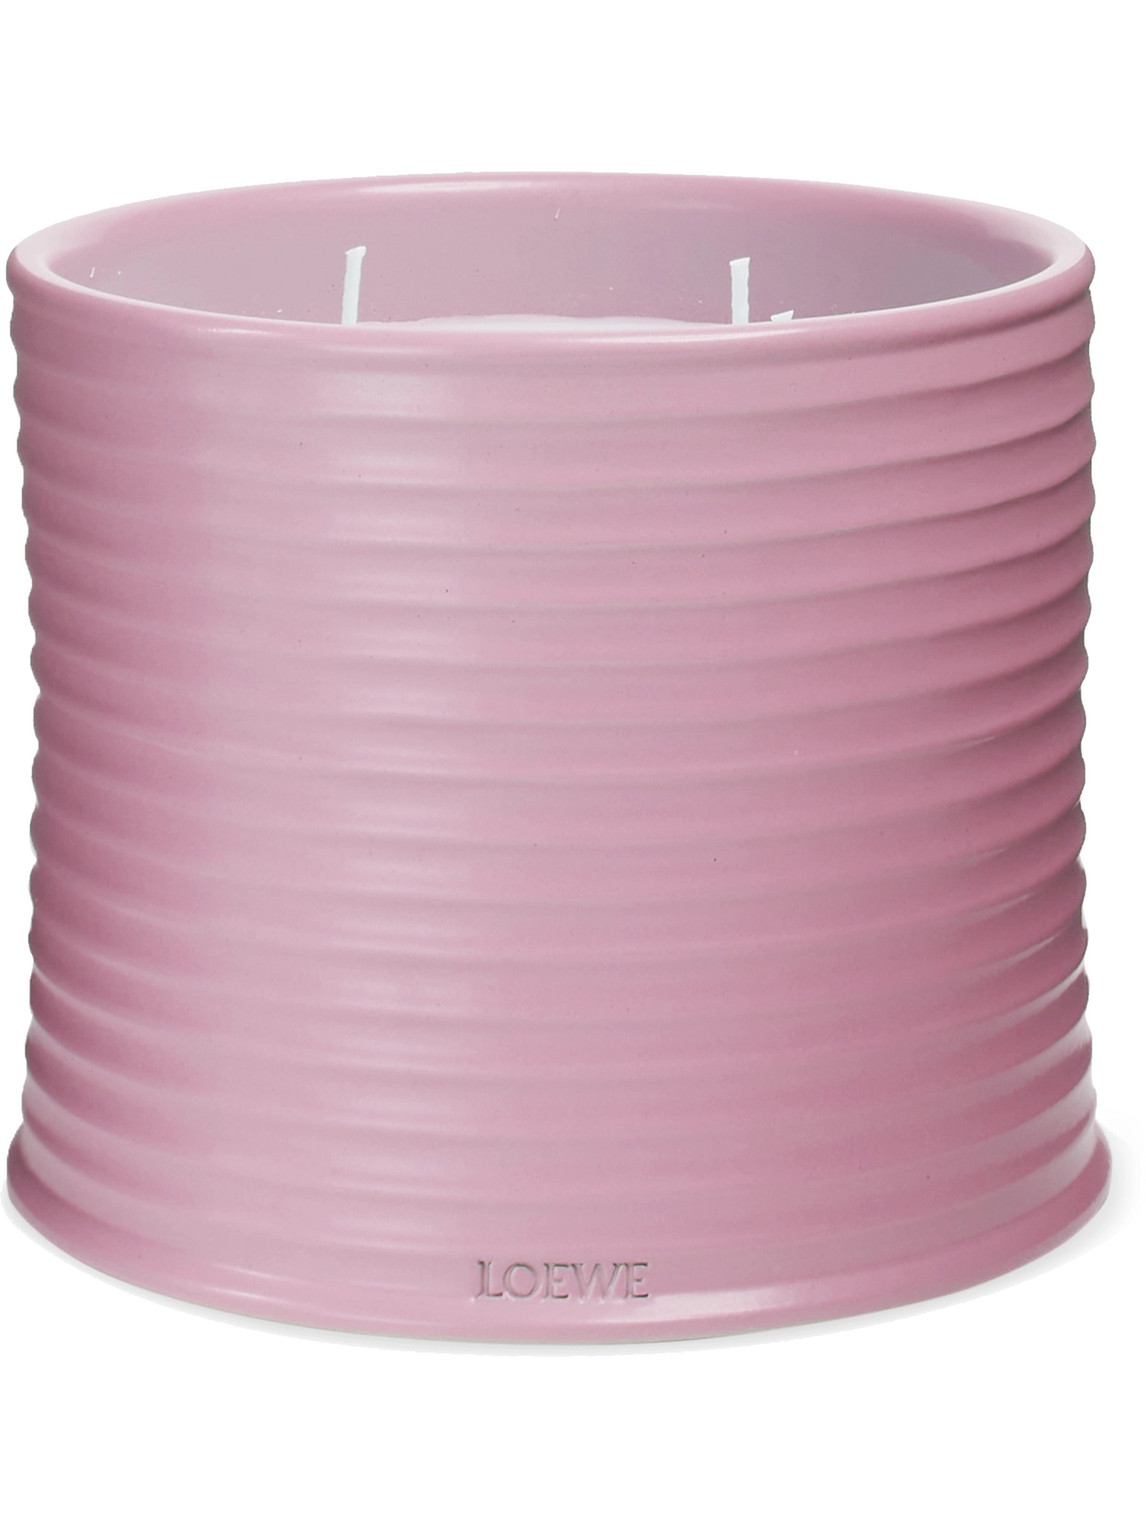 Loewe Ivy Scented Candle, 2120g In Colorless